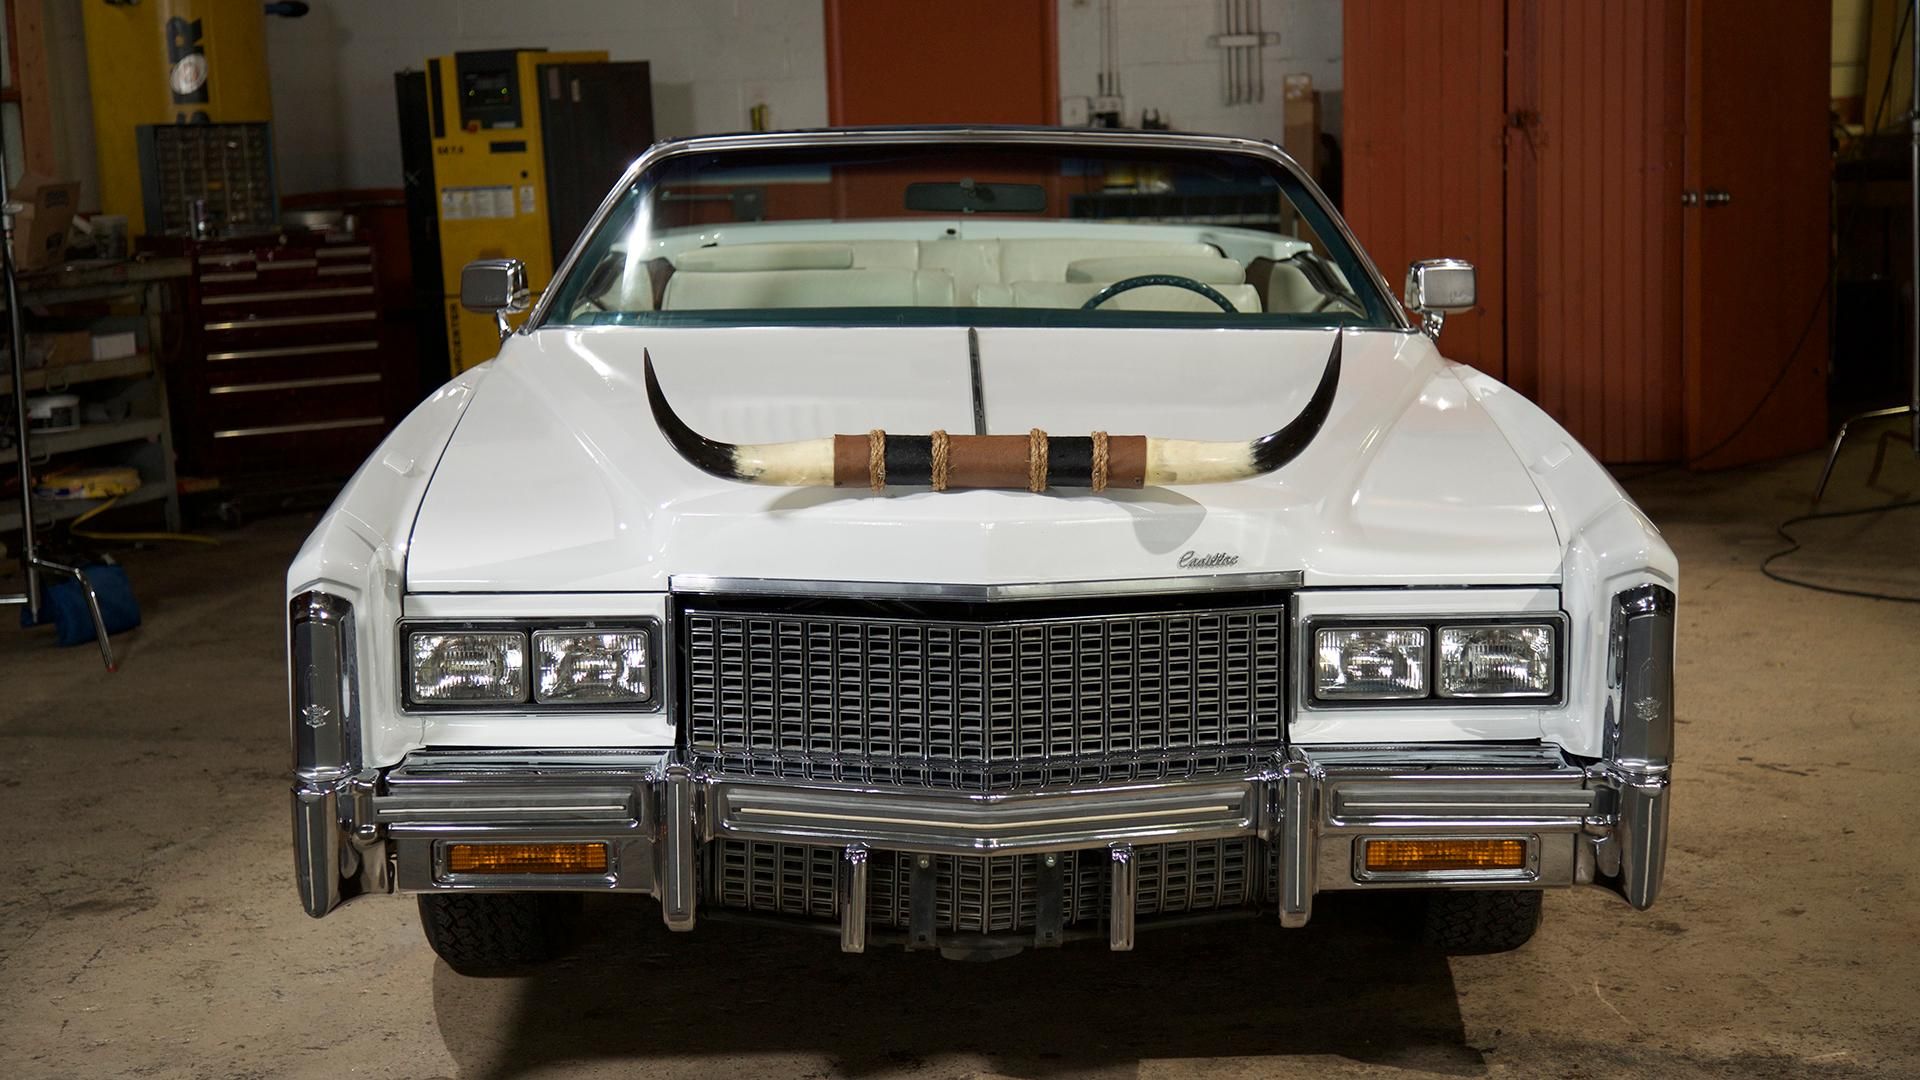 A Cadillac parked at the Junkyard Empire's workshop